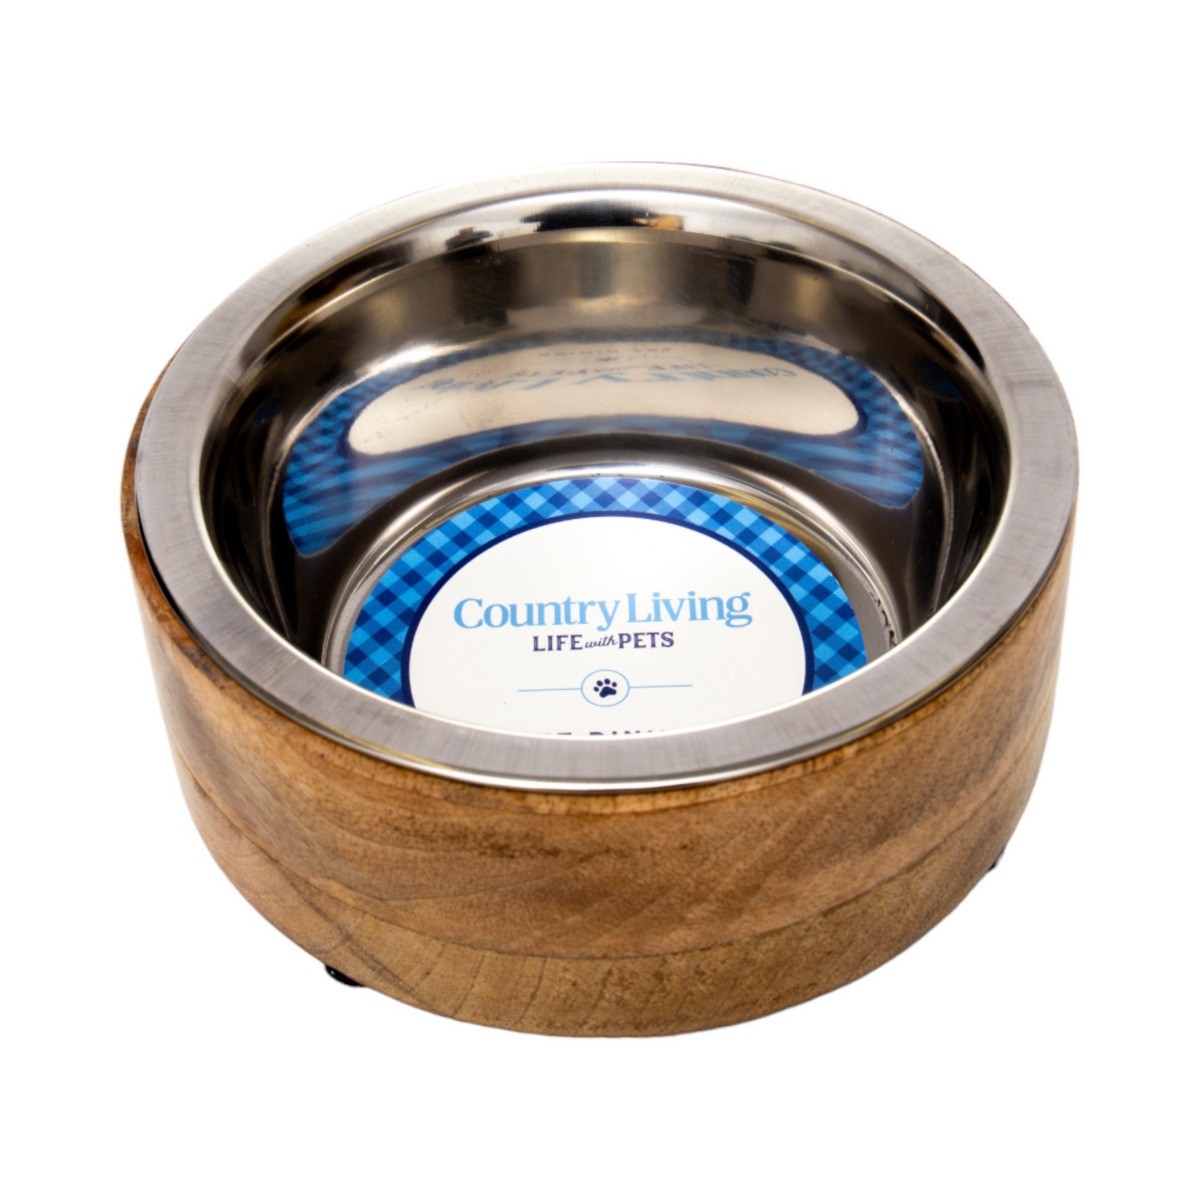 Country Living Eco-Friendly Mango Wood Dog Bowl, Stainless Steel Pet Feeder, Durable & Stylish Dish, Available in 3 Sizes, Sustainable Dog Feeding Sol